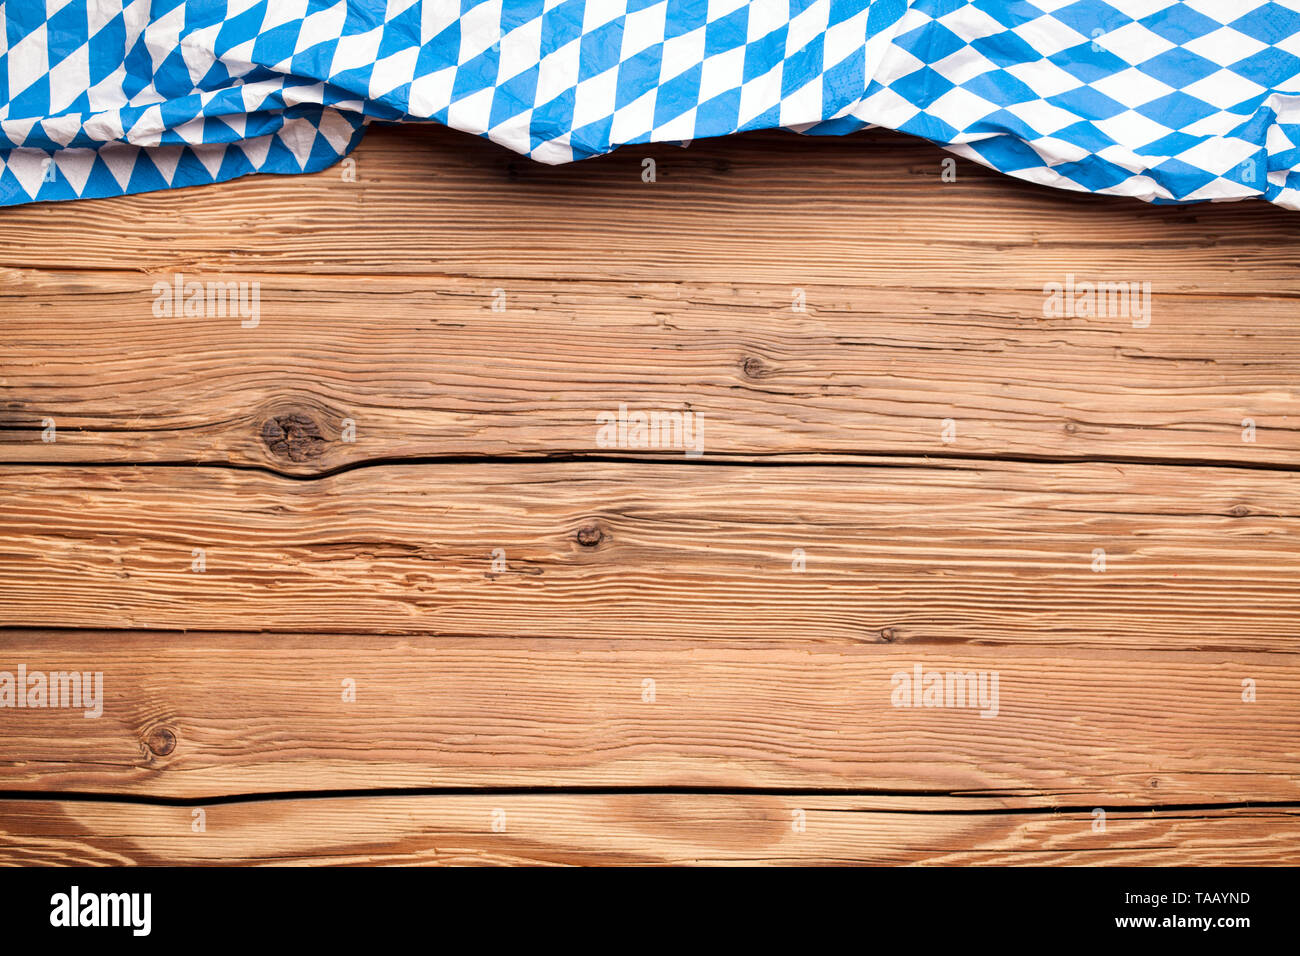 Oktoberfest tablecloth on an old rustic wooden background Stock Photo